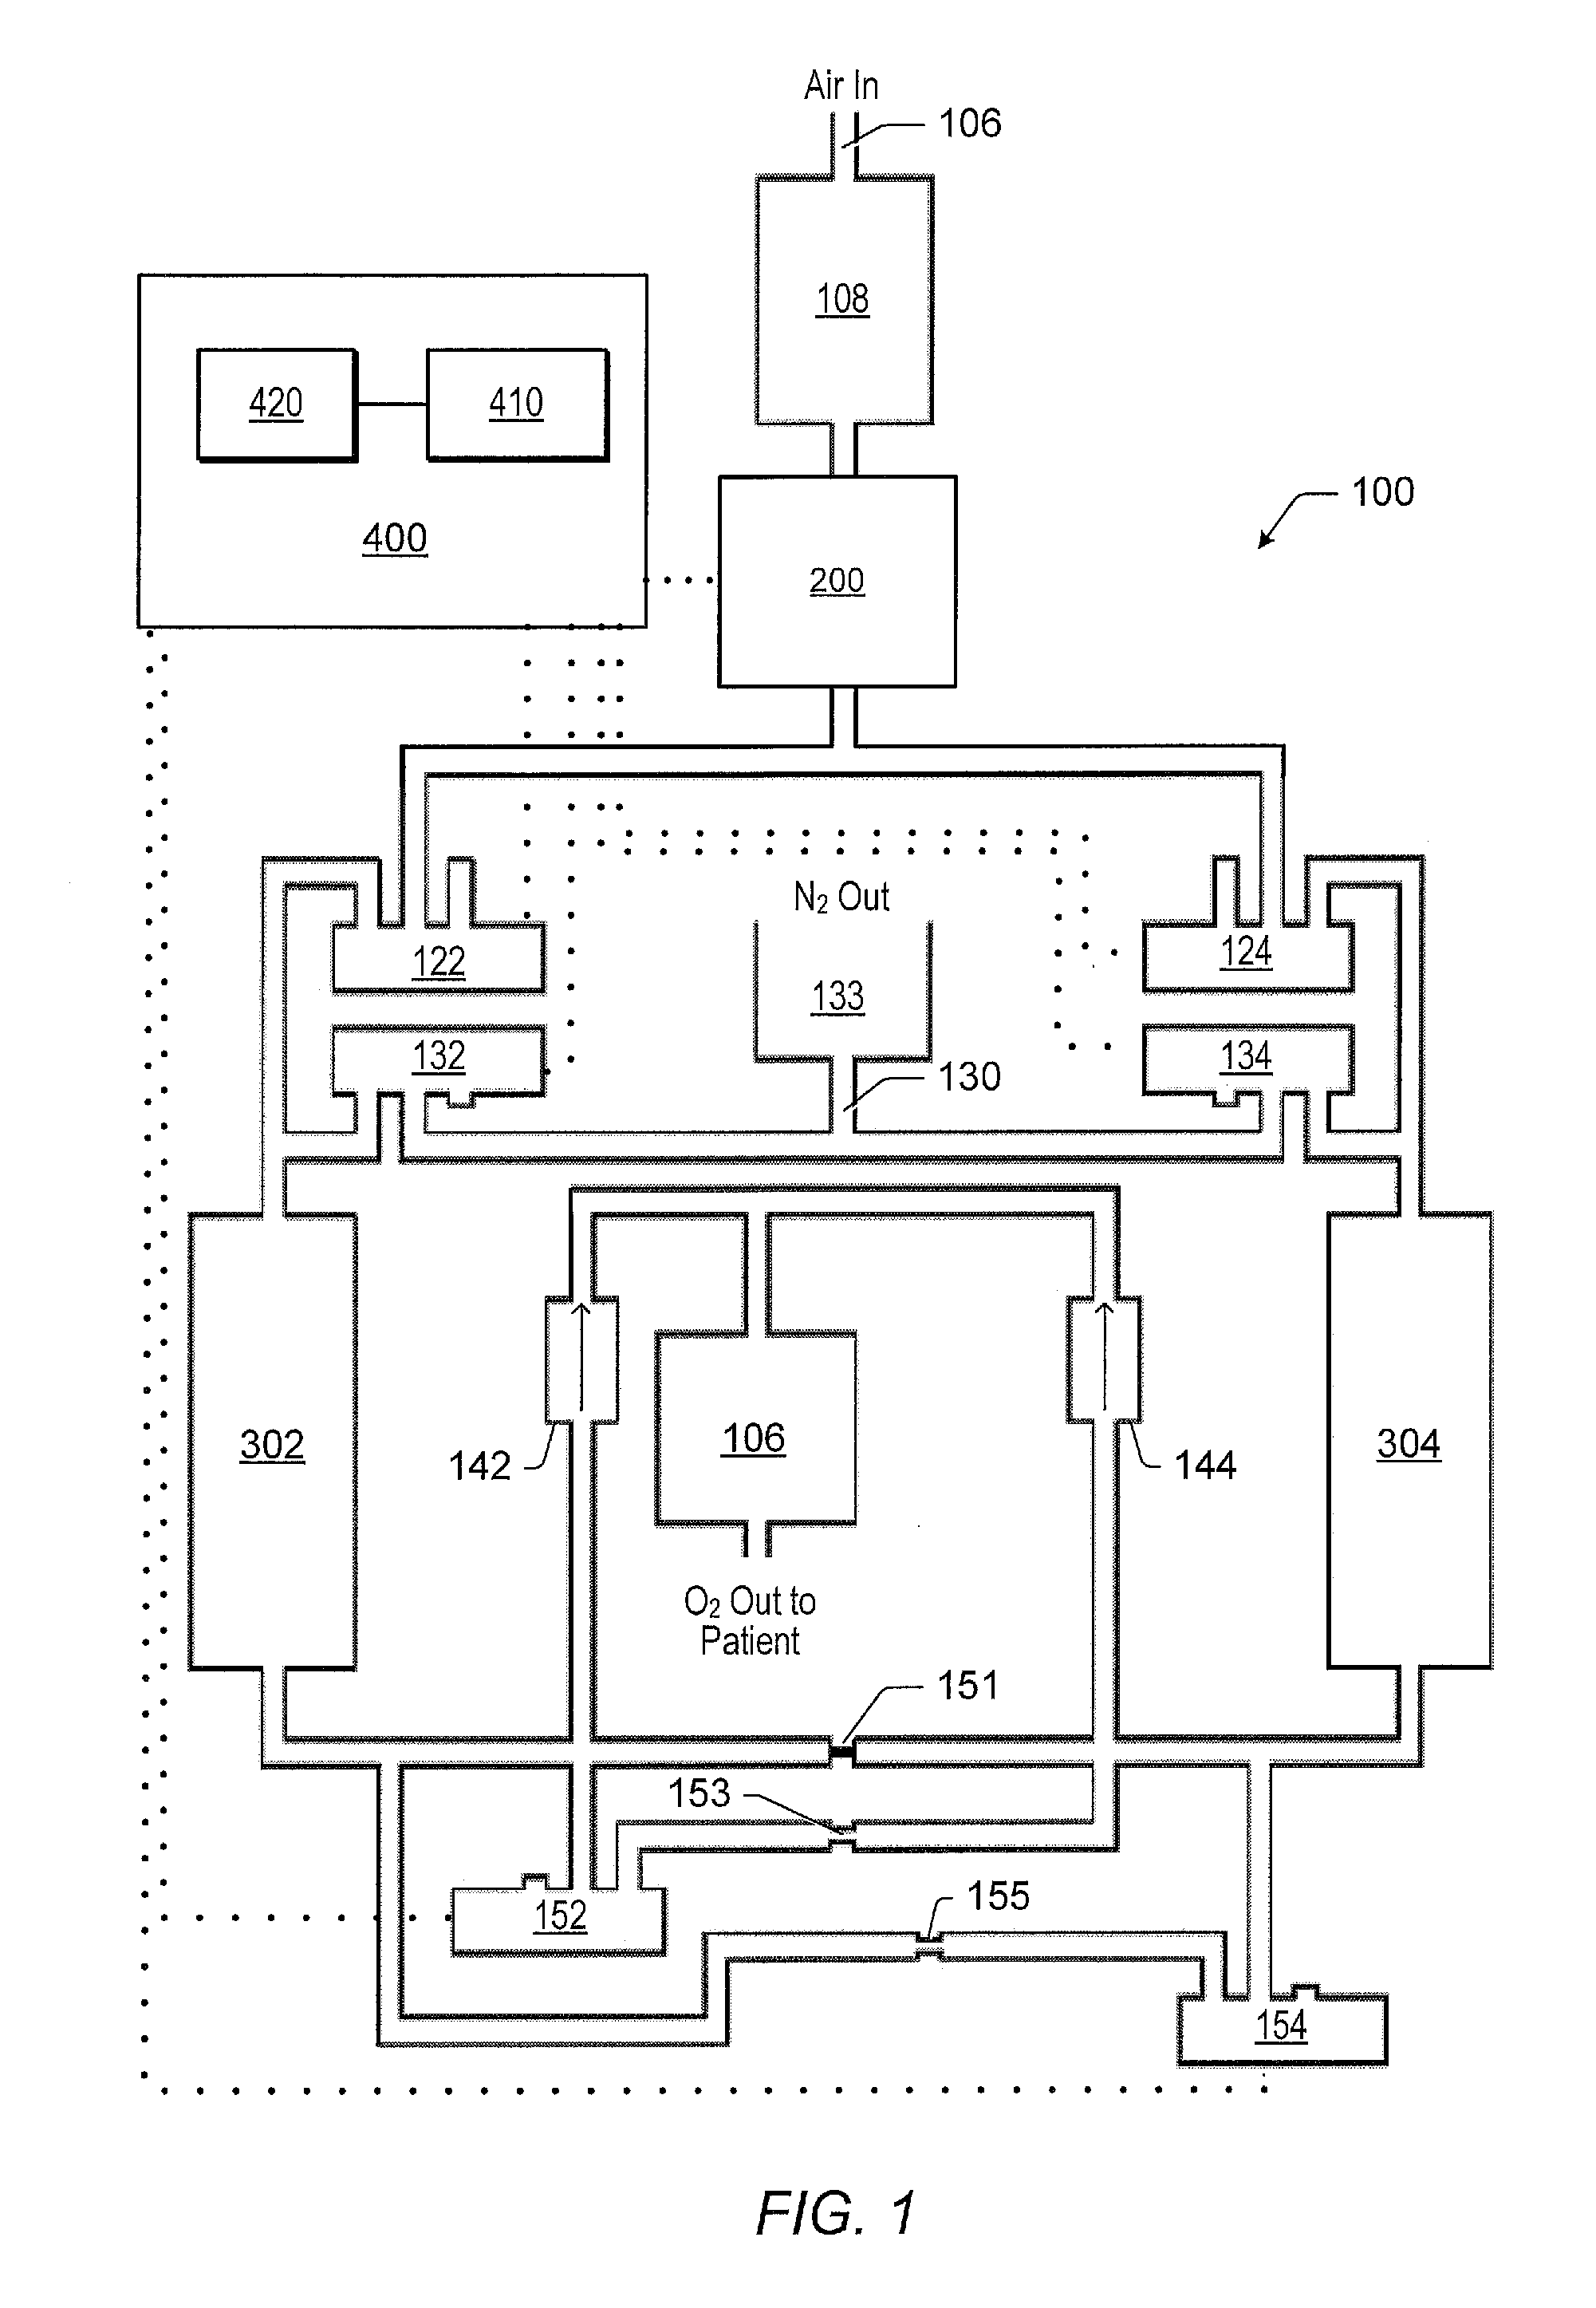 Power management systems and methods for use in an oxygen concentrator